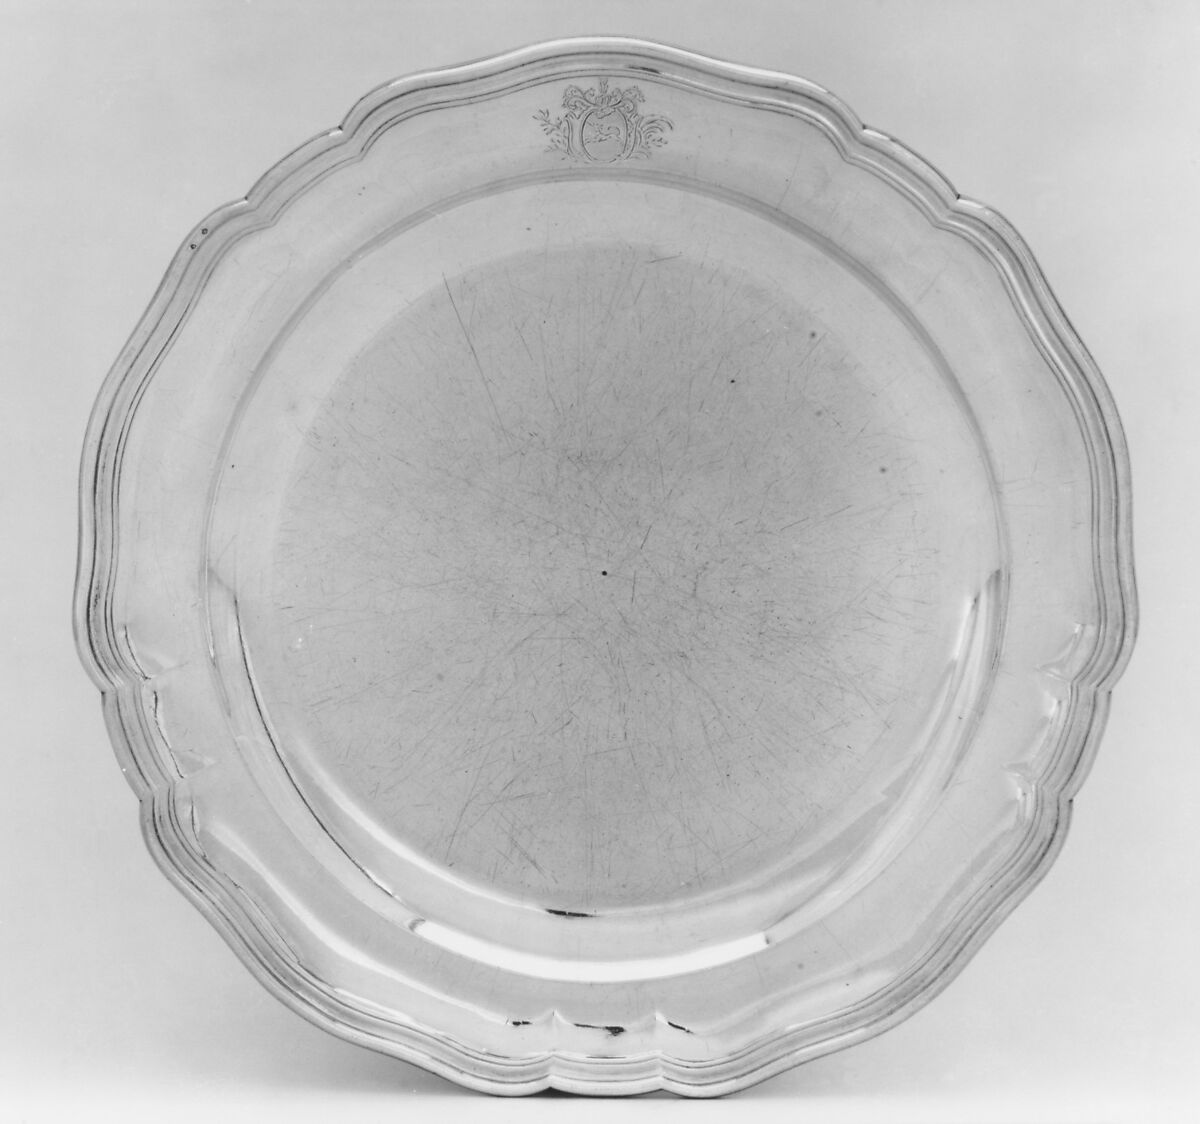 Plate (one of a set of two of graduated size), Edme-Pierre Balzac (1705–ca. 1786, master 1739, recorded 1781), Silver, French, Paris 